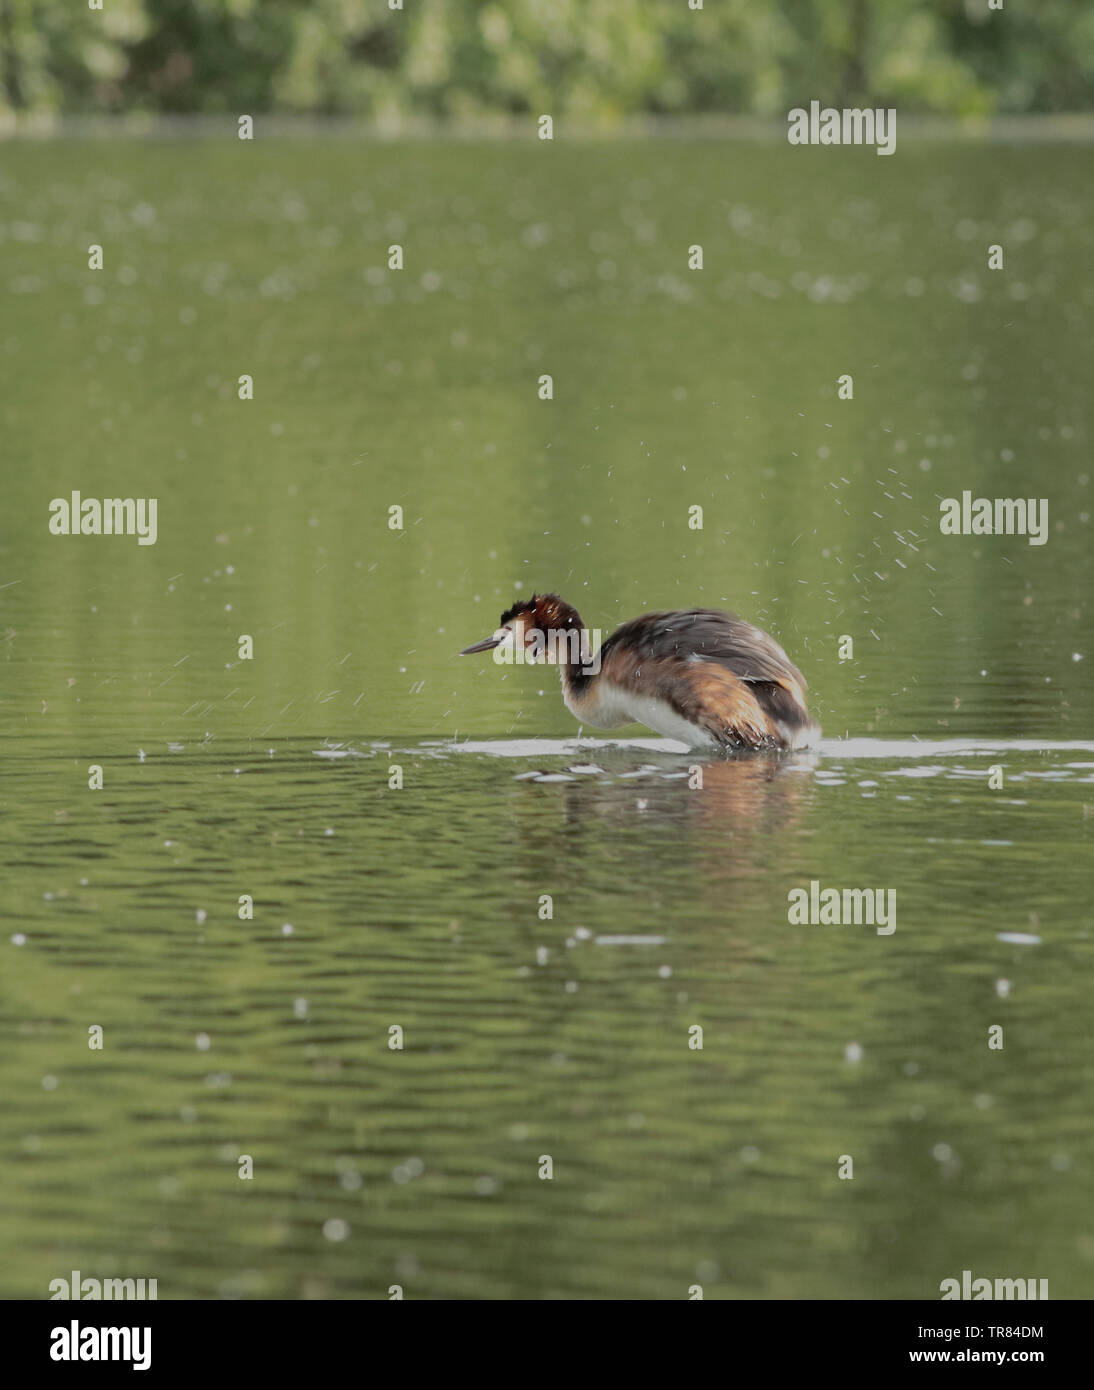 Great Crested Grebe shaking off water Stock Photo